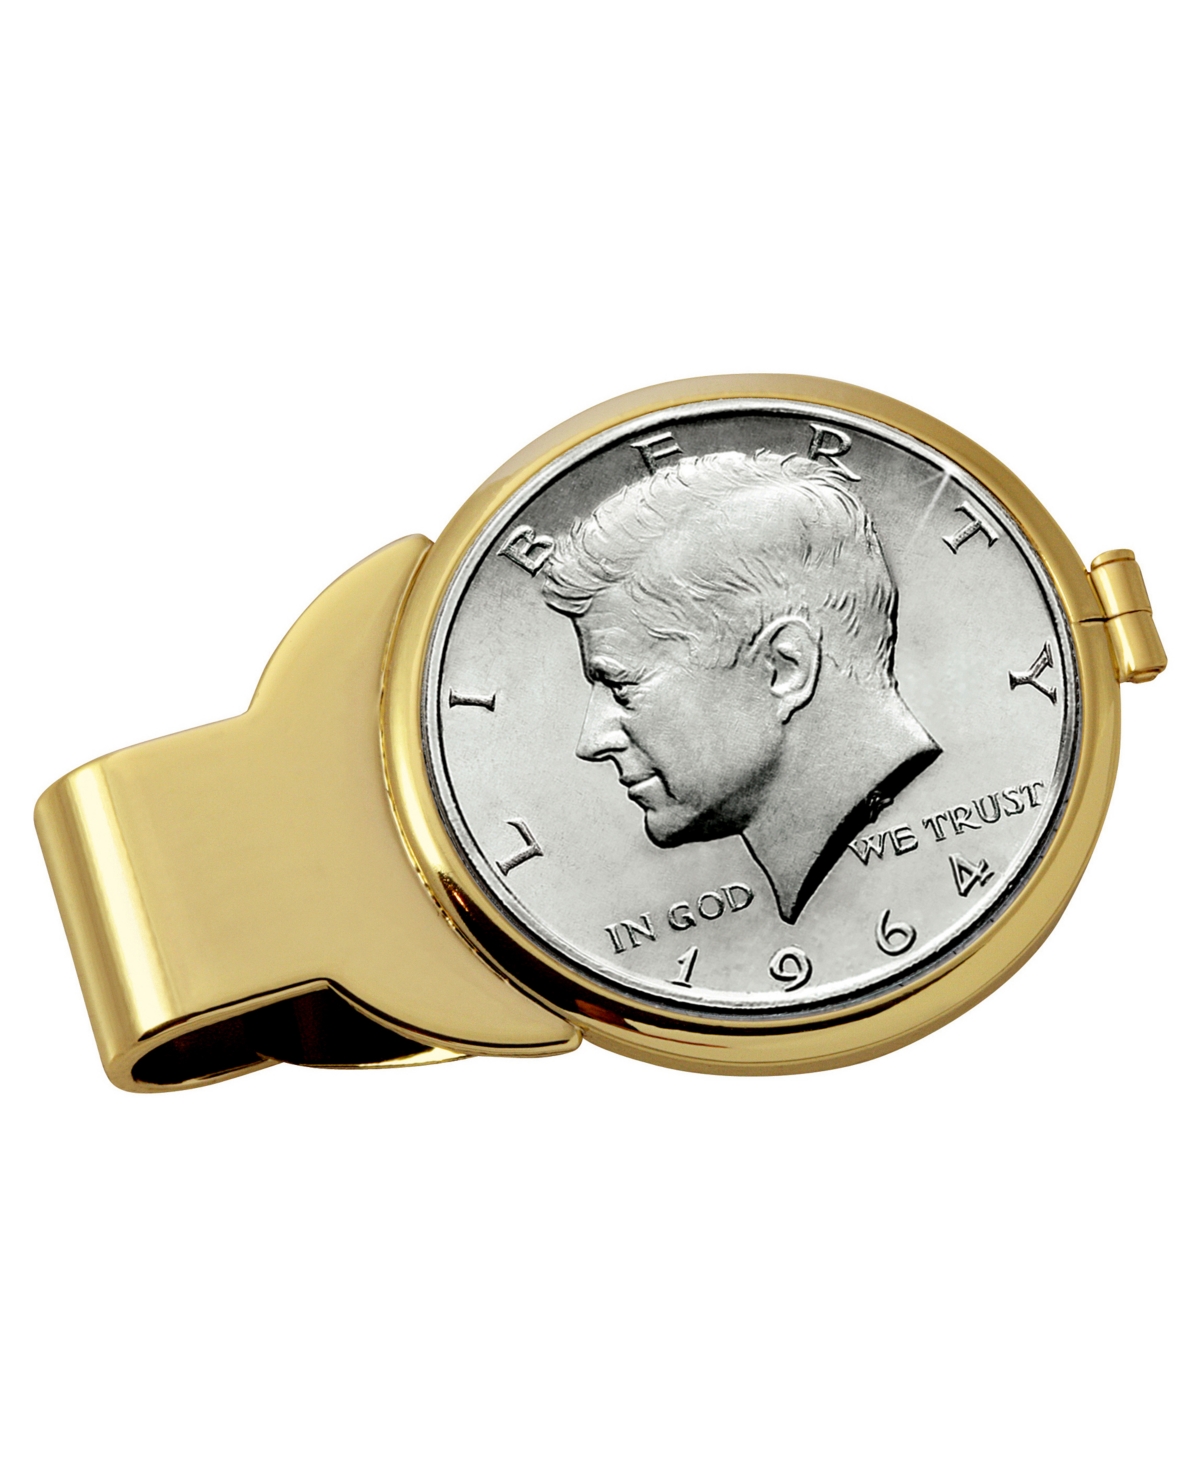 Men's American Coin Treasures Jfk 1964 First Year of Issue Half Dollar Coin Money Clip - Gold